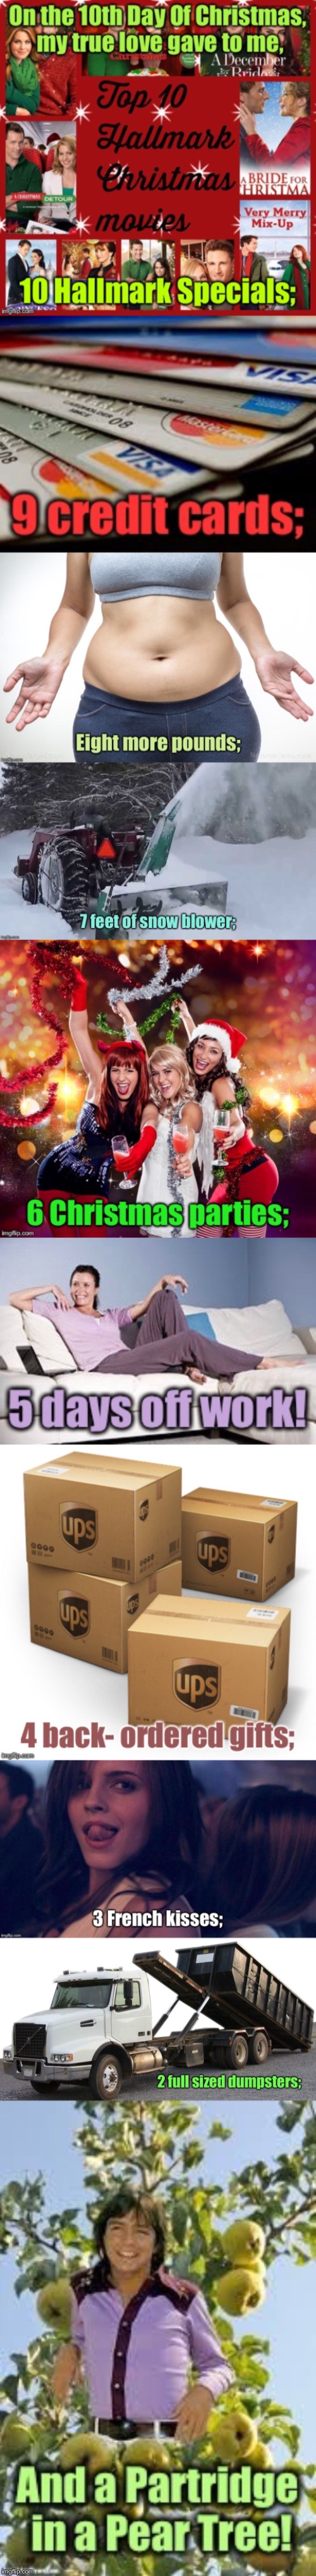 Dr. Sarcasm’s 12 Days Of Christmas: Day 10 | . | image tagged in 12 days of christmas,10 hallmark specials,9 credit cards,8 pounds,funny memes,drsarcasm | made w/ Imgflip meme maker